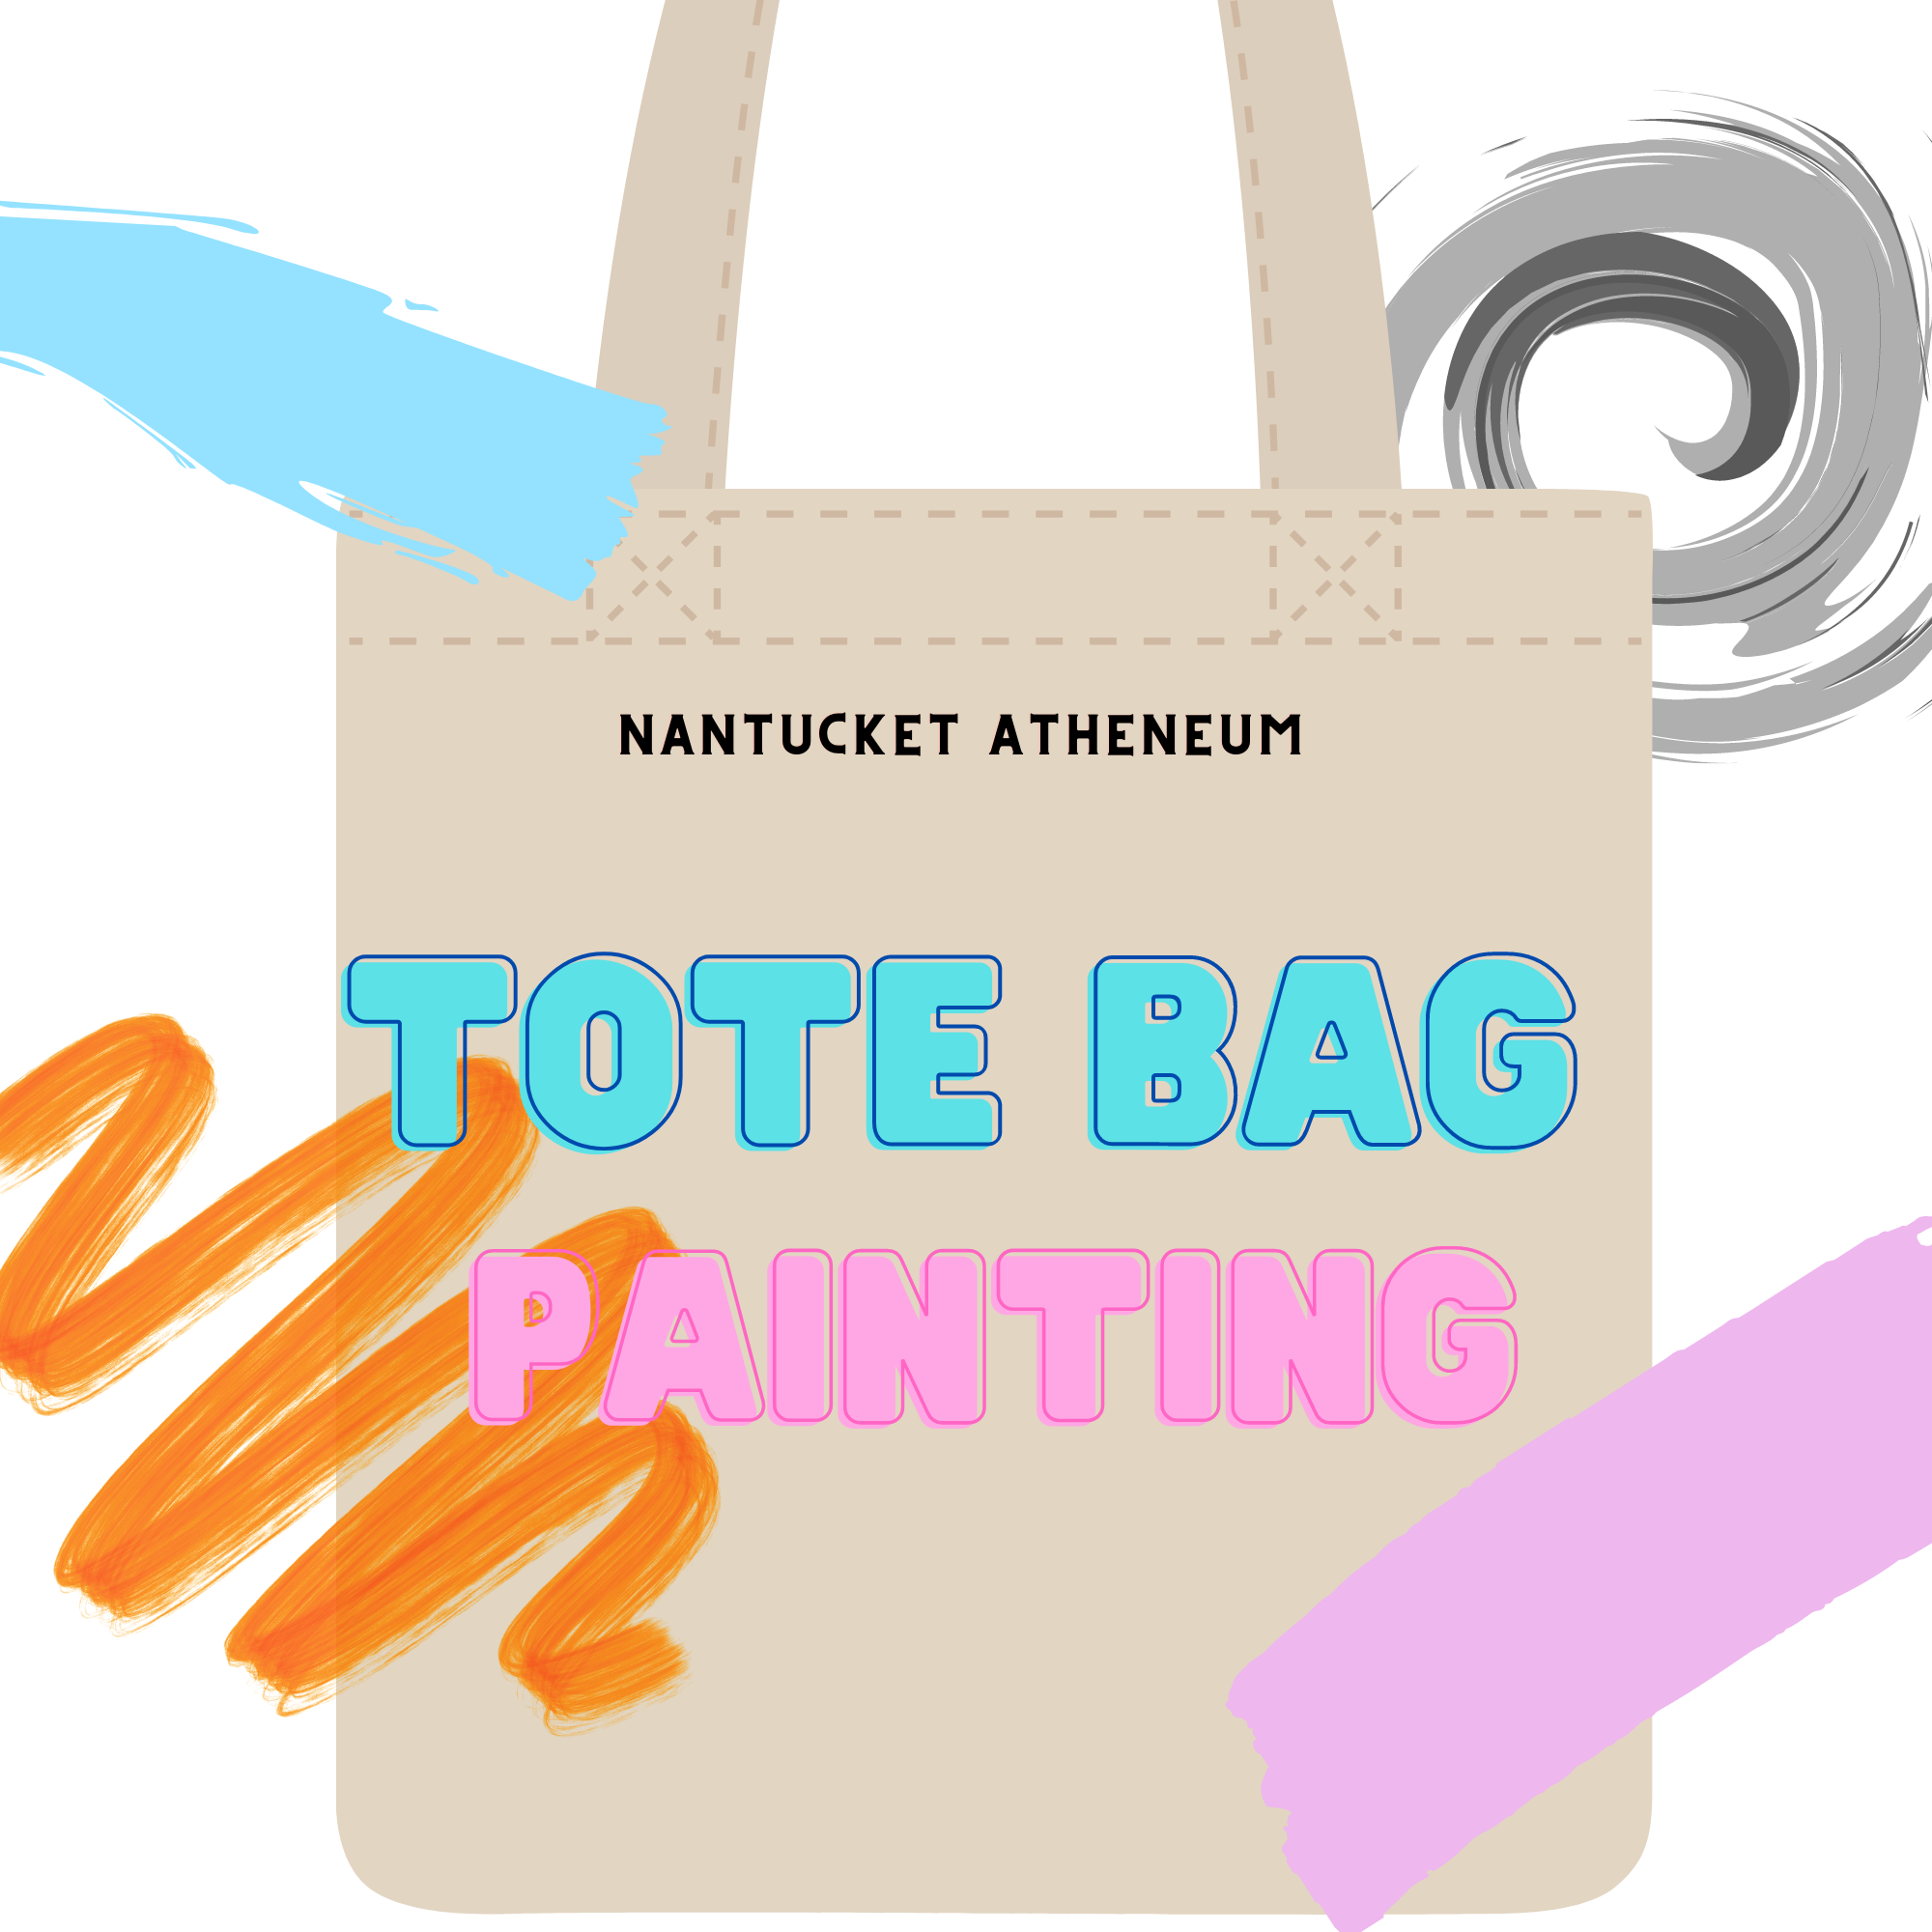 Tote bag with paint splatters, announcing tote bag painting event for teens at atheneum